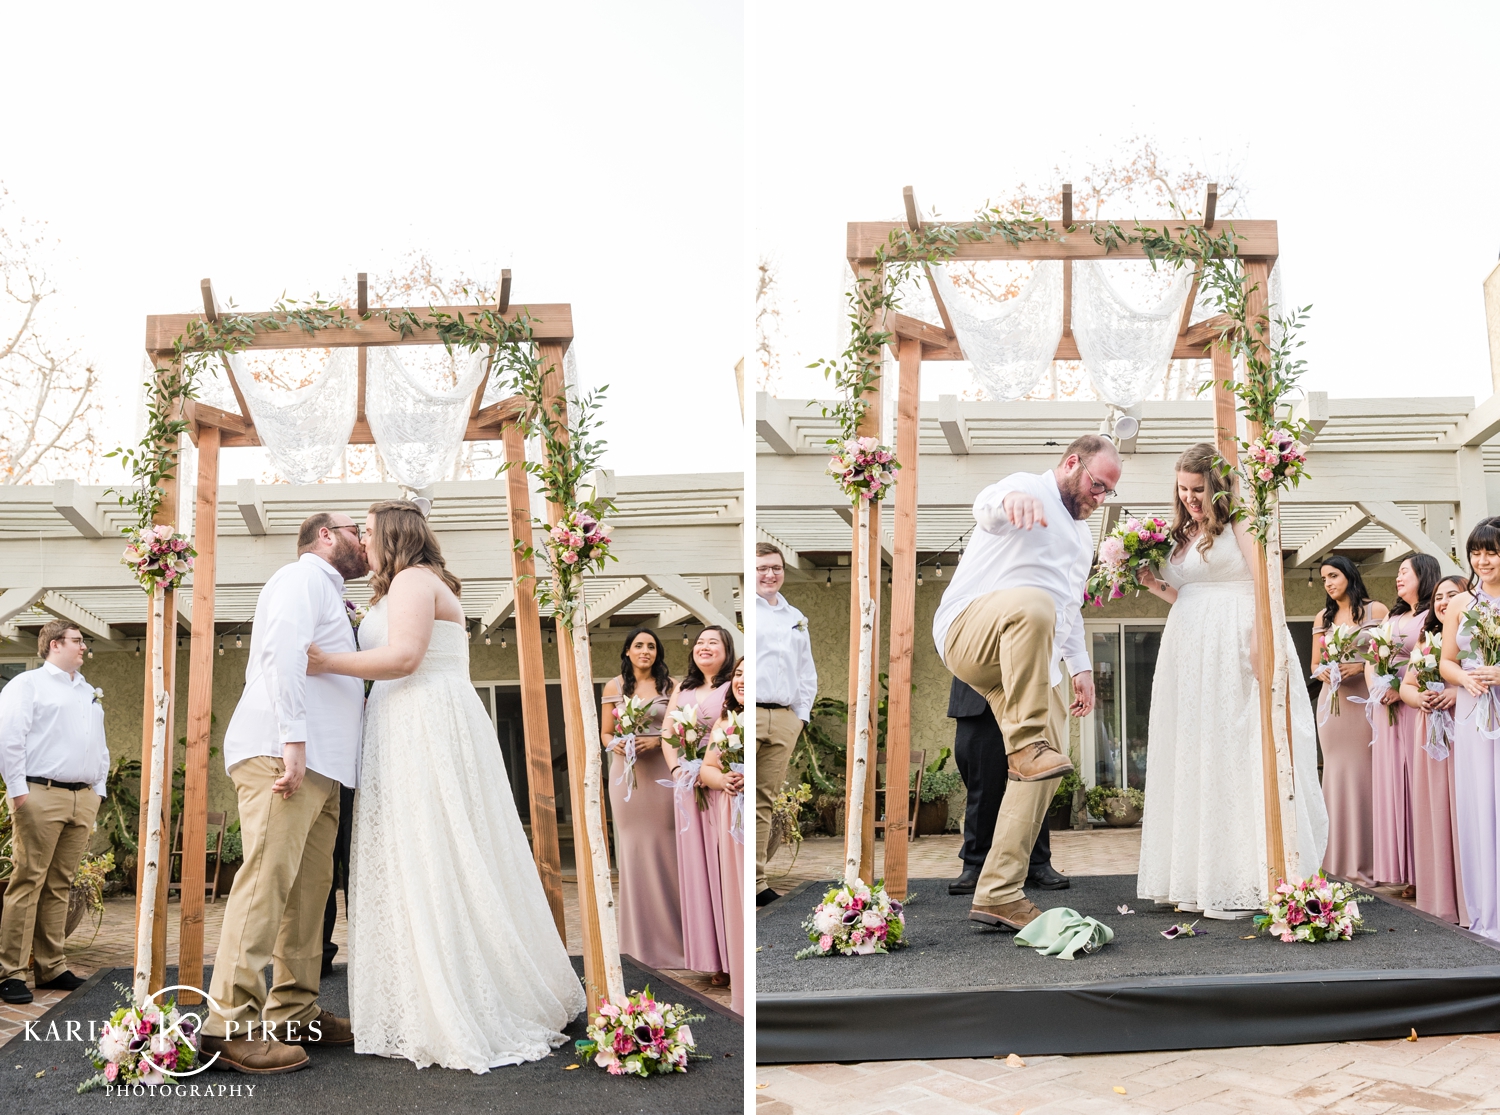 Bride and groom under a wooden Chuppah